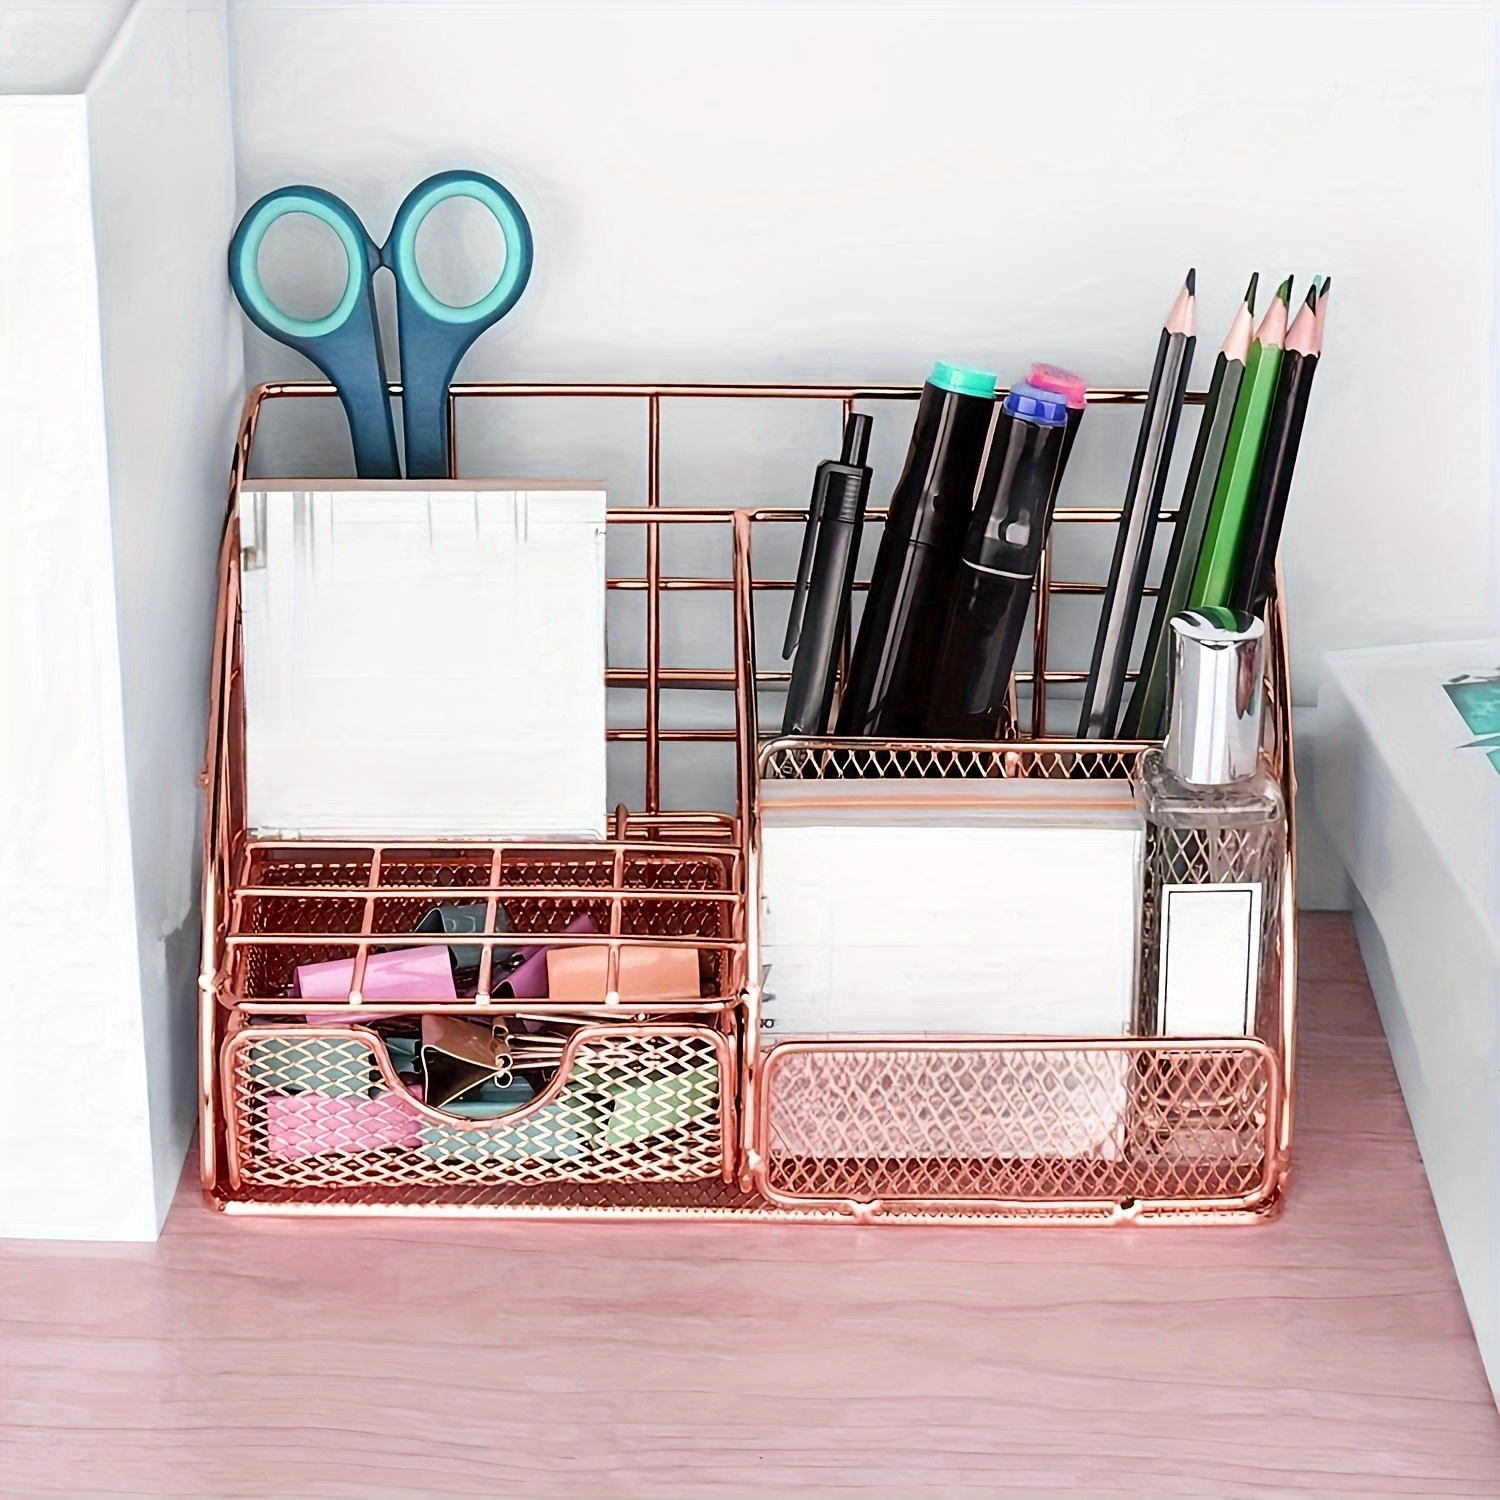 Rose Gold Storage Basket, Desktop Stationery And Sundries Organizer,  Cosmetic Organizer For Women, Mesh Office Supplies Desk Accessories, With 5  Compartments + 1 Mini Sliding Drawer, Home Organization, Back To School  Supplies